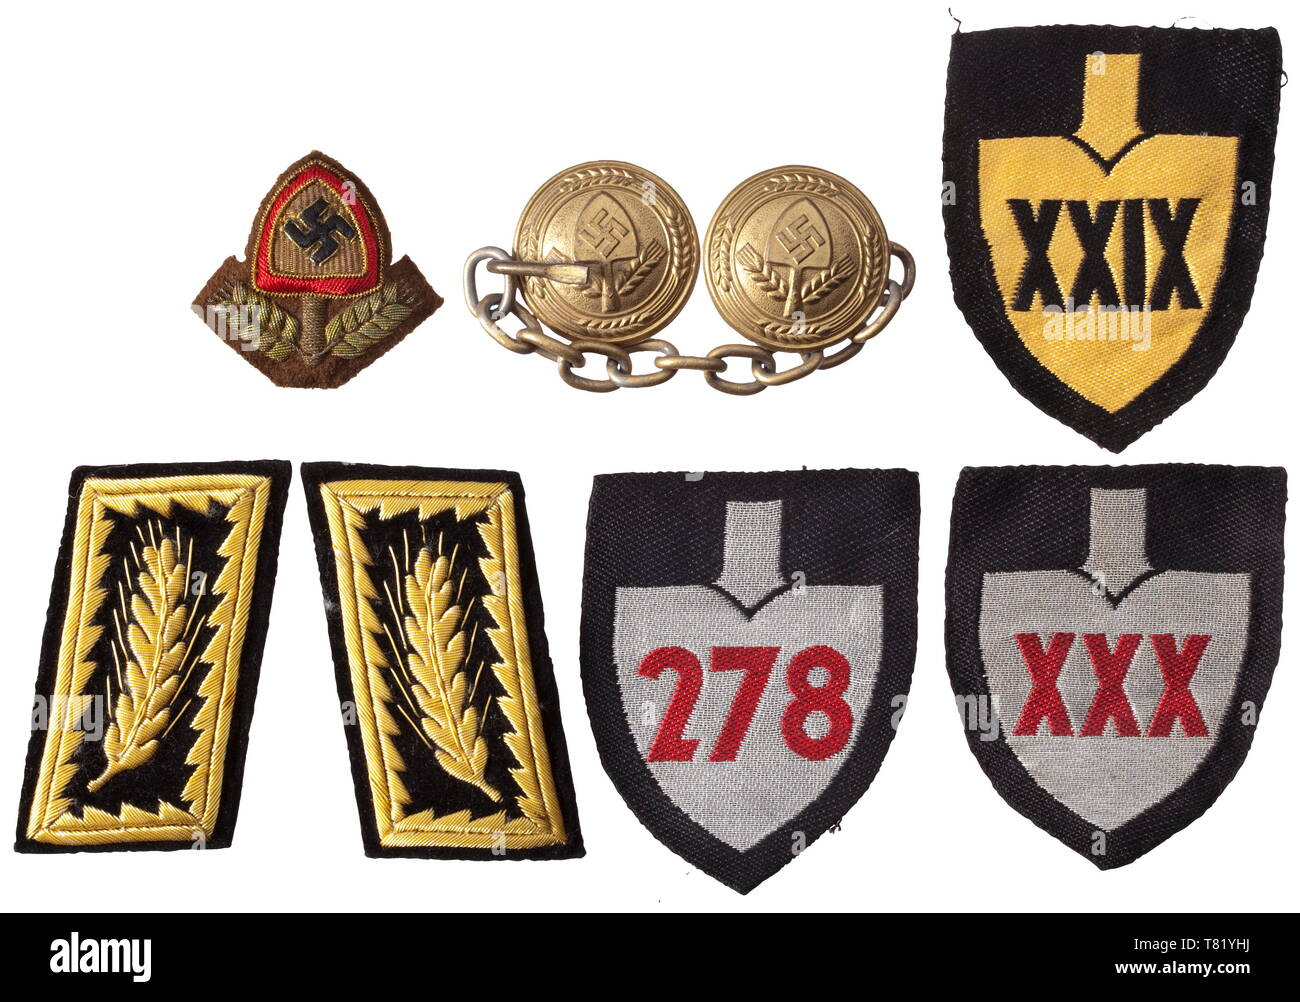 Generalarbeitsführer Herbert Riester - insignia for the RAD uniform. Collar patches in the rank of a Generalarbeitsführer, cellon on black velvet. Gold-embroidered national emblem for the (tr) 'coffee bean' (coll. for a special type of service cap), gold-woven district spade of section 'XXIX' and a clasp of gilt aluminium (prong missing) for the cloak called (tr) 'Spaniard'. Included are two further district spades for RAD leaders. Also cf. the other lots from the Riester estate. historic, historical, Reichsarbeitsdienst, Reich Labor Service, State Labour Service, organisat, Editorial-Use-Only Stock Photo